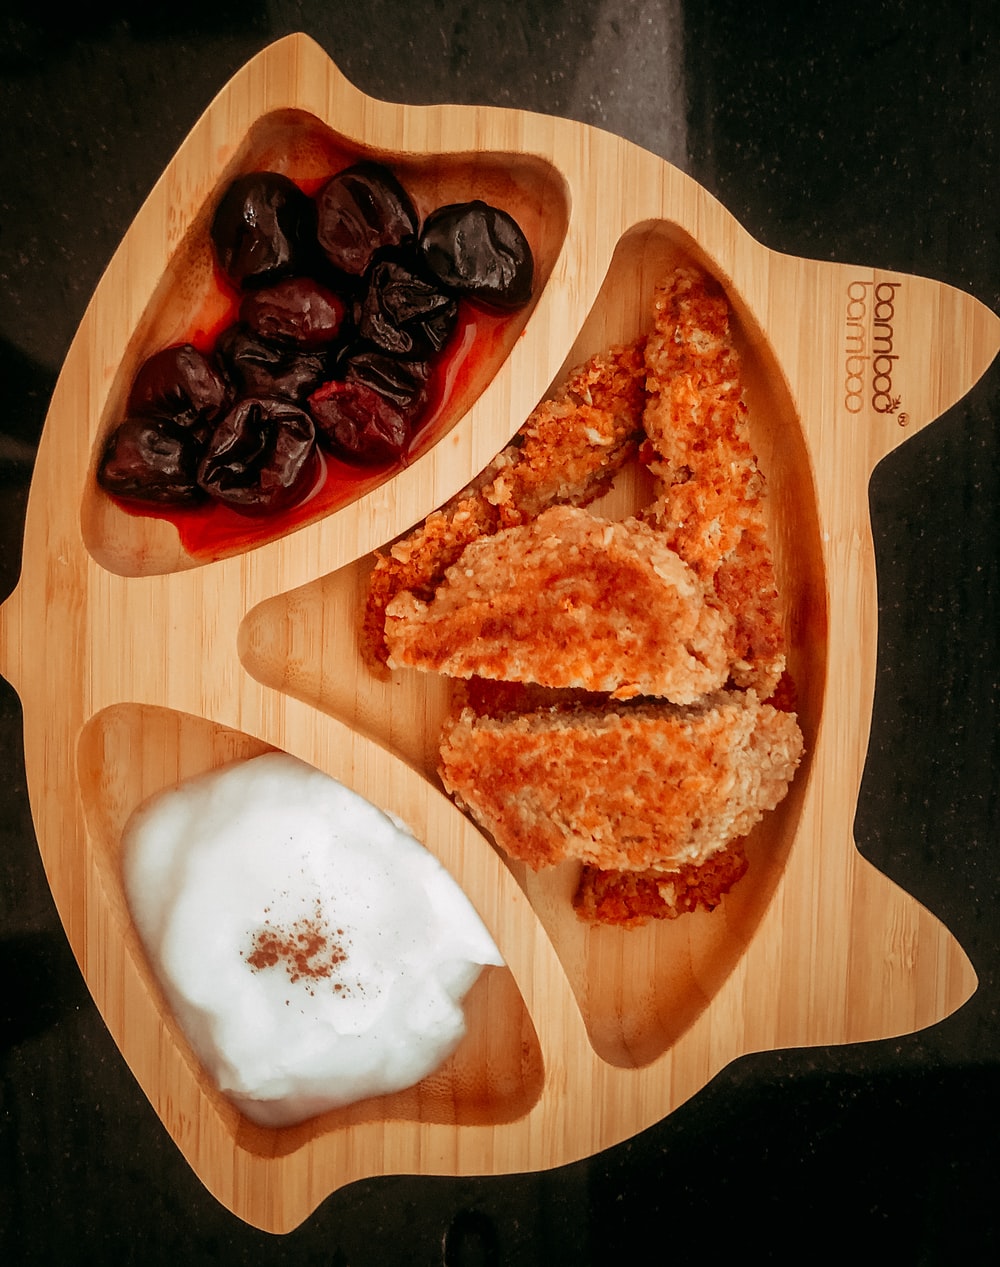 brown bread with white cream on brown wooden chopping board is part of a balanced diet